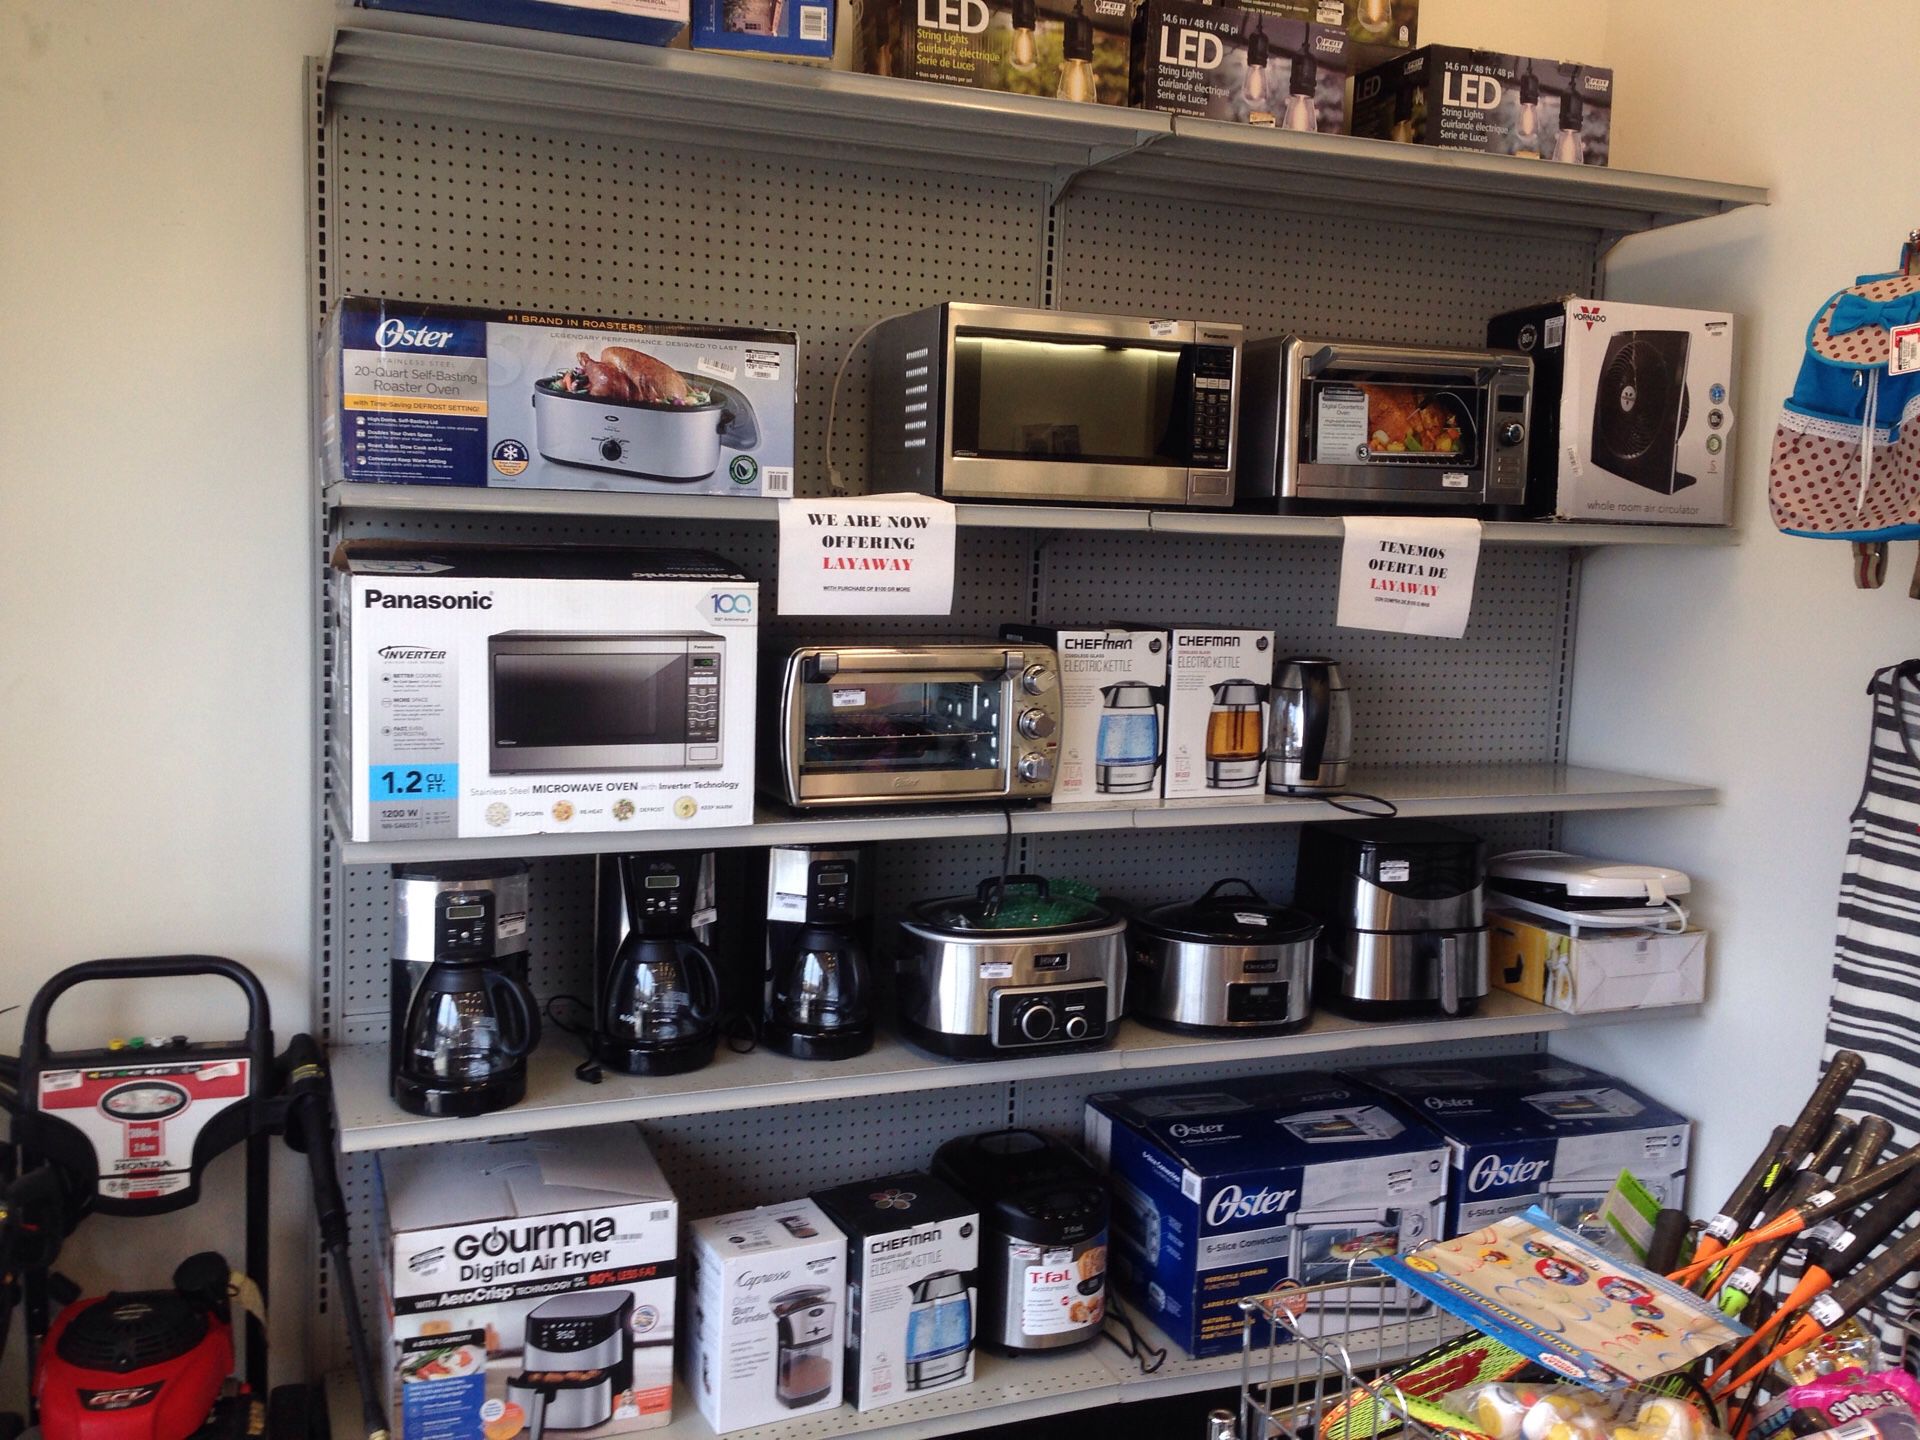 Microwaves , ovens , air conditioners and more ! 💰💰💰💰